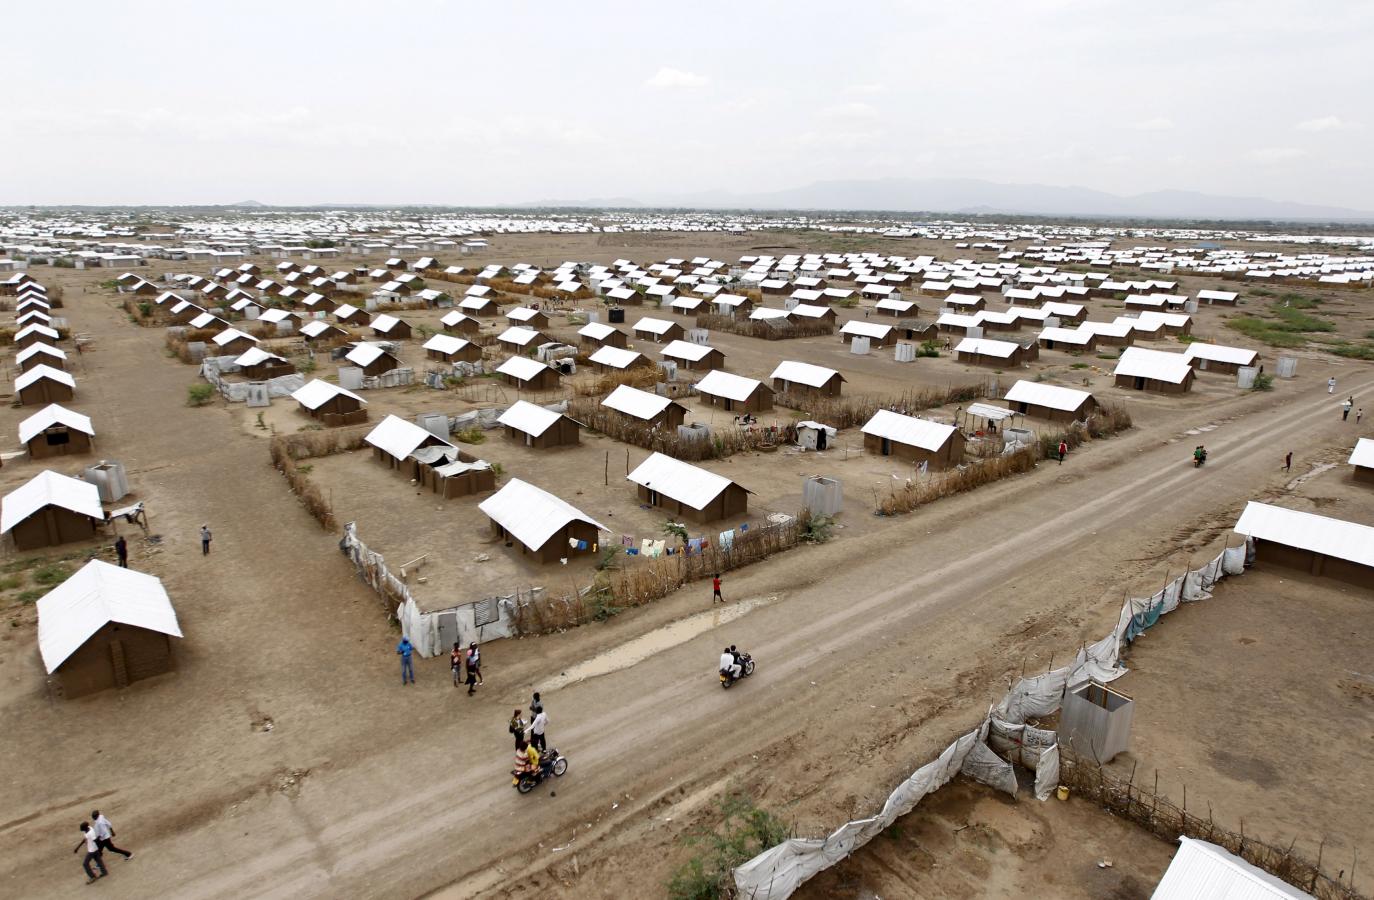 Deadly paths and daunting challenges refugees face while fleeing their homes